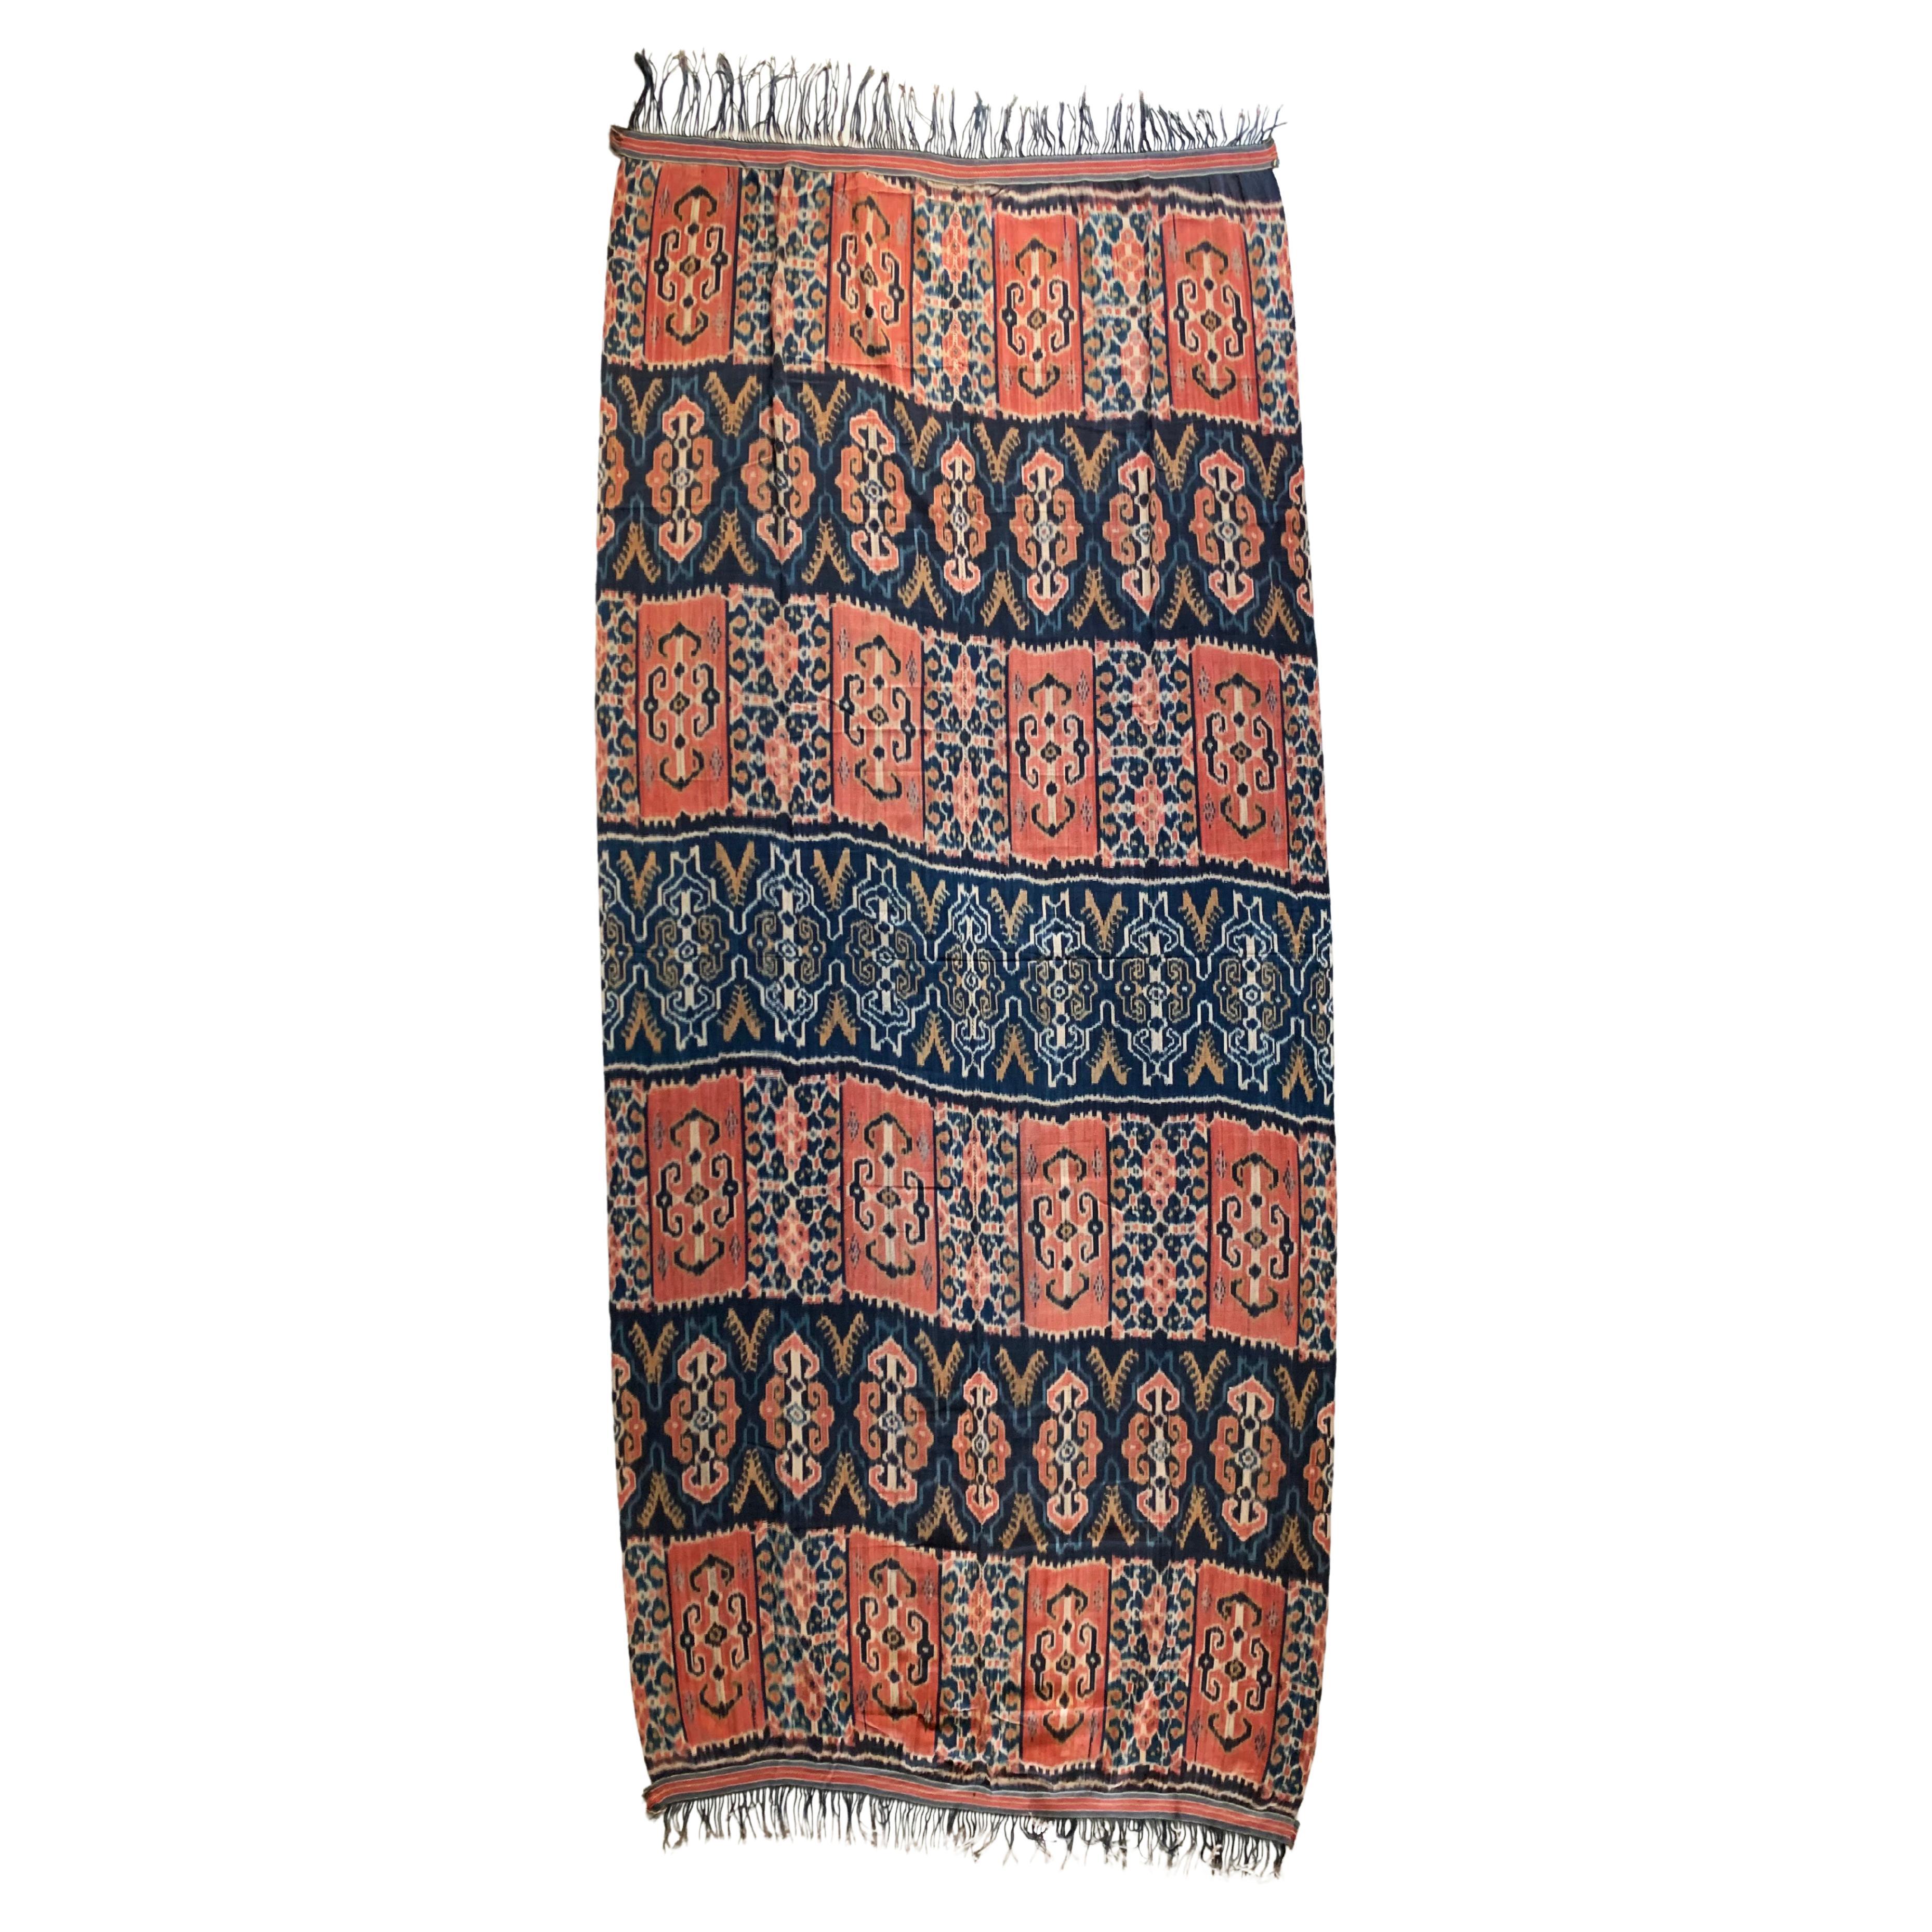 Ikat Textile from Sumba Island with Stunning Tribal Motifs, Indonesia For Sale